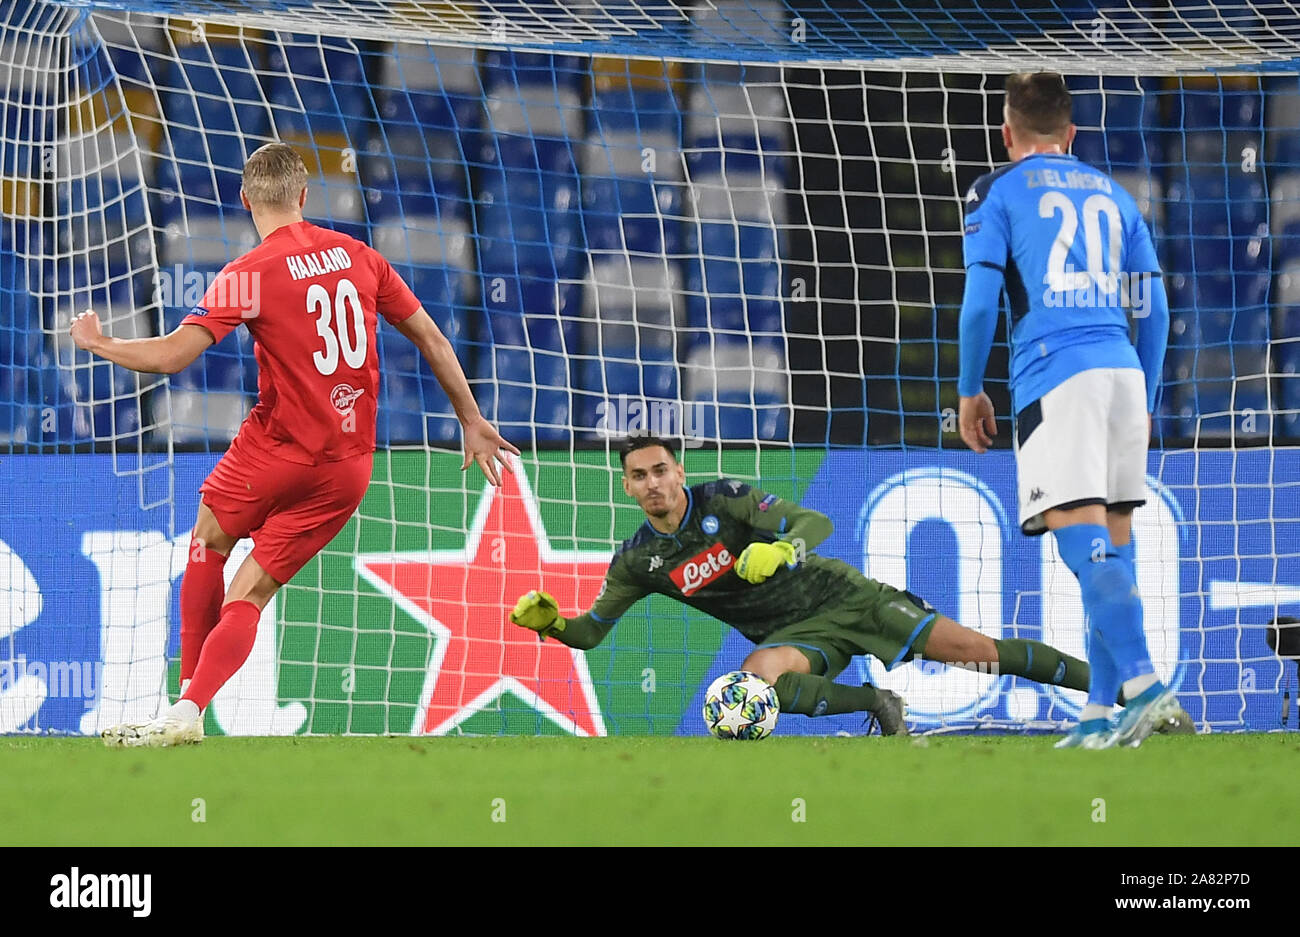 Naples, Italy. 5th Nov, 2019. Salzsburg's Erling Braut Halland scores his goal during the UEFA Champions League Group E match between Napoli and Salzsburg in Naples, Italy, Nov. 5, 2019. Credit: Alberto Lingria/Xinhua/Alamy Live News Stock Photo